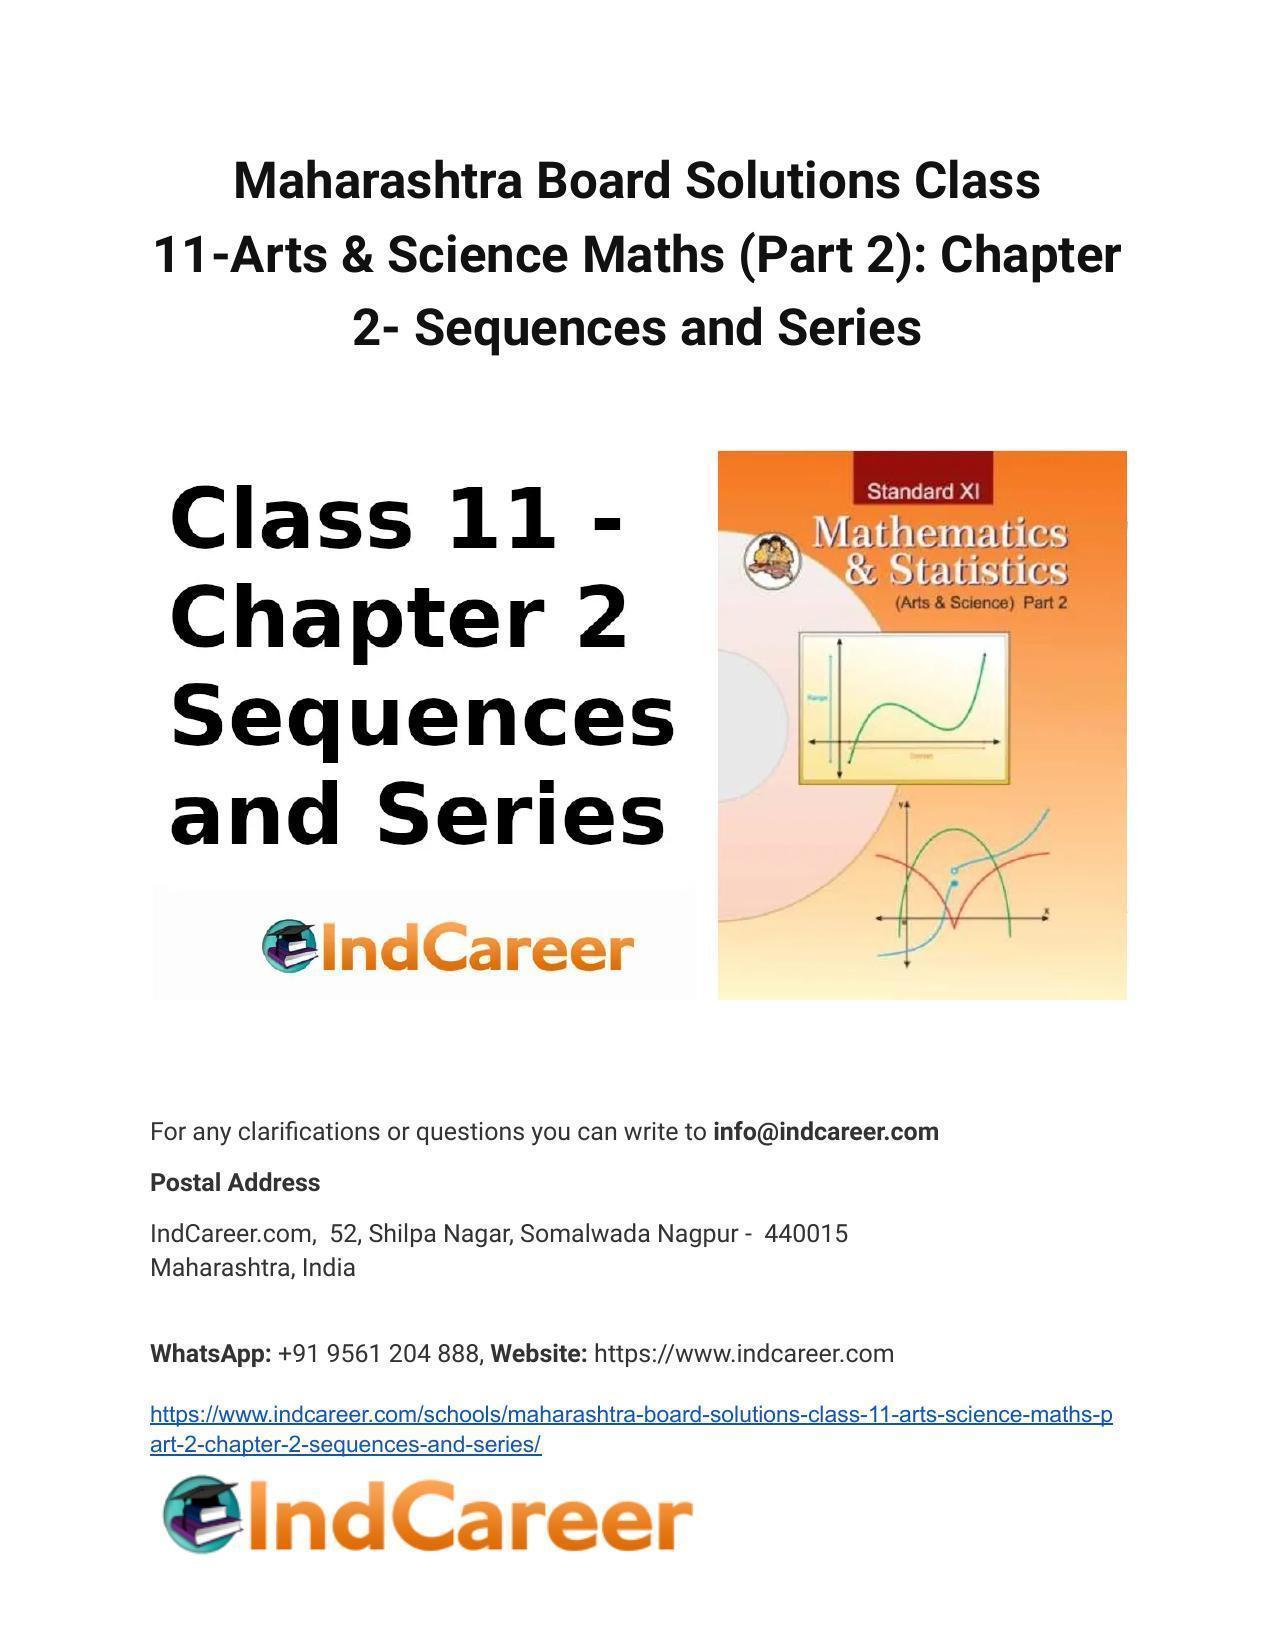 Maharashtra Board Solutions Class 11-Arts & Science Maths (Part 2): Chapter 2- Sequences and Series - Page 1